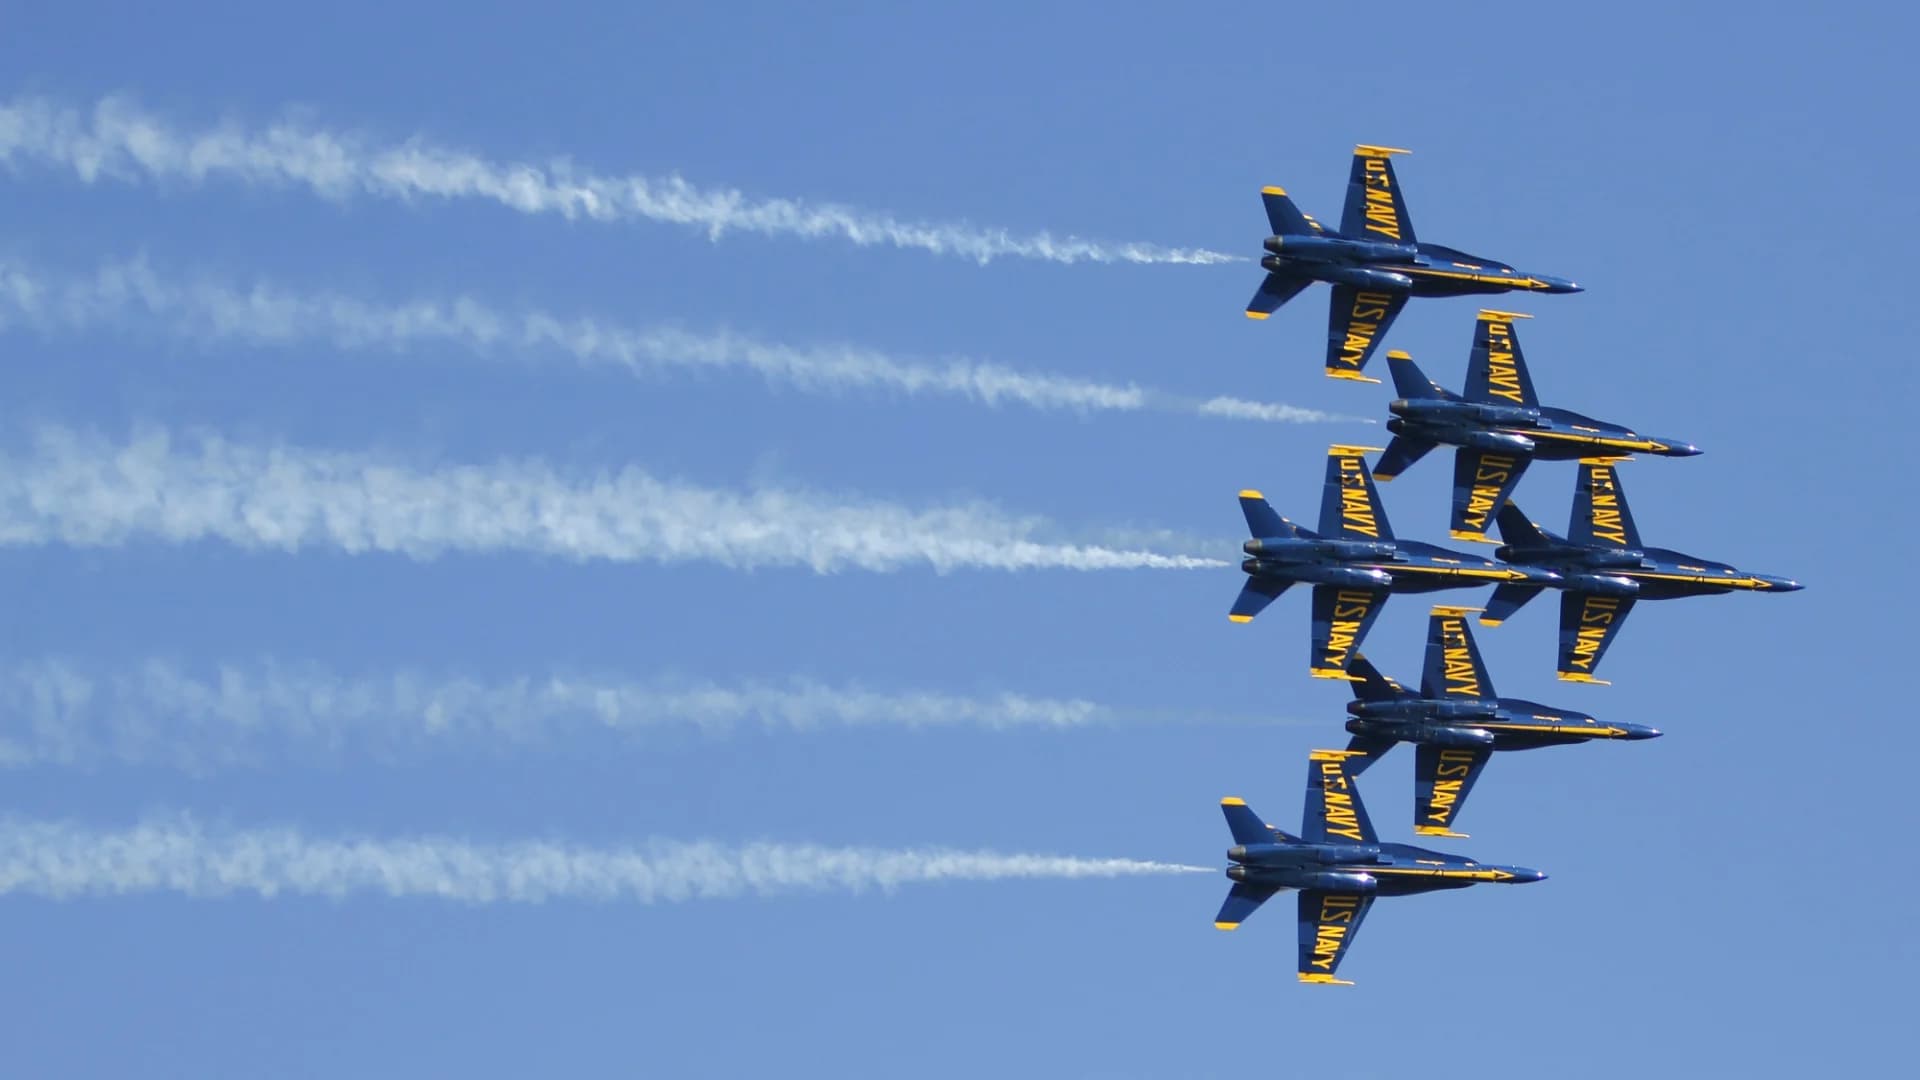 They're back! Blue Angels to headline Bethpage Air Show at Jones Beach